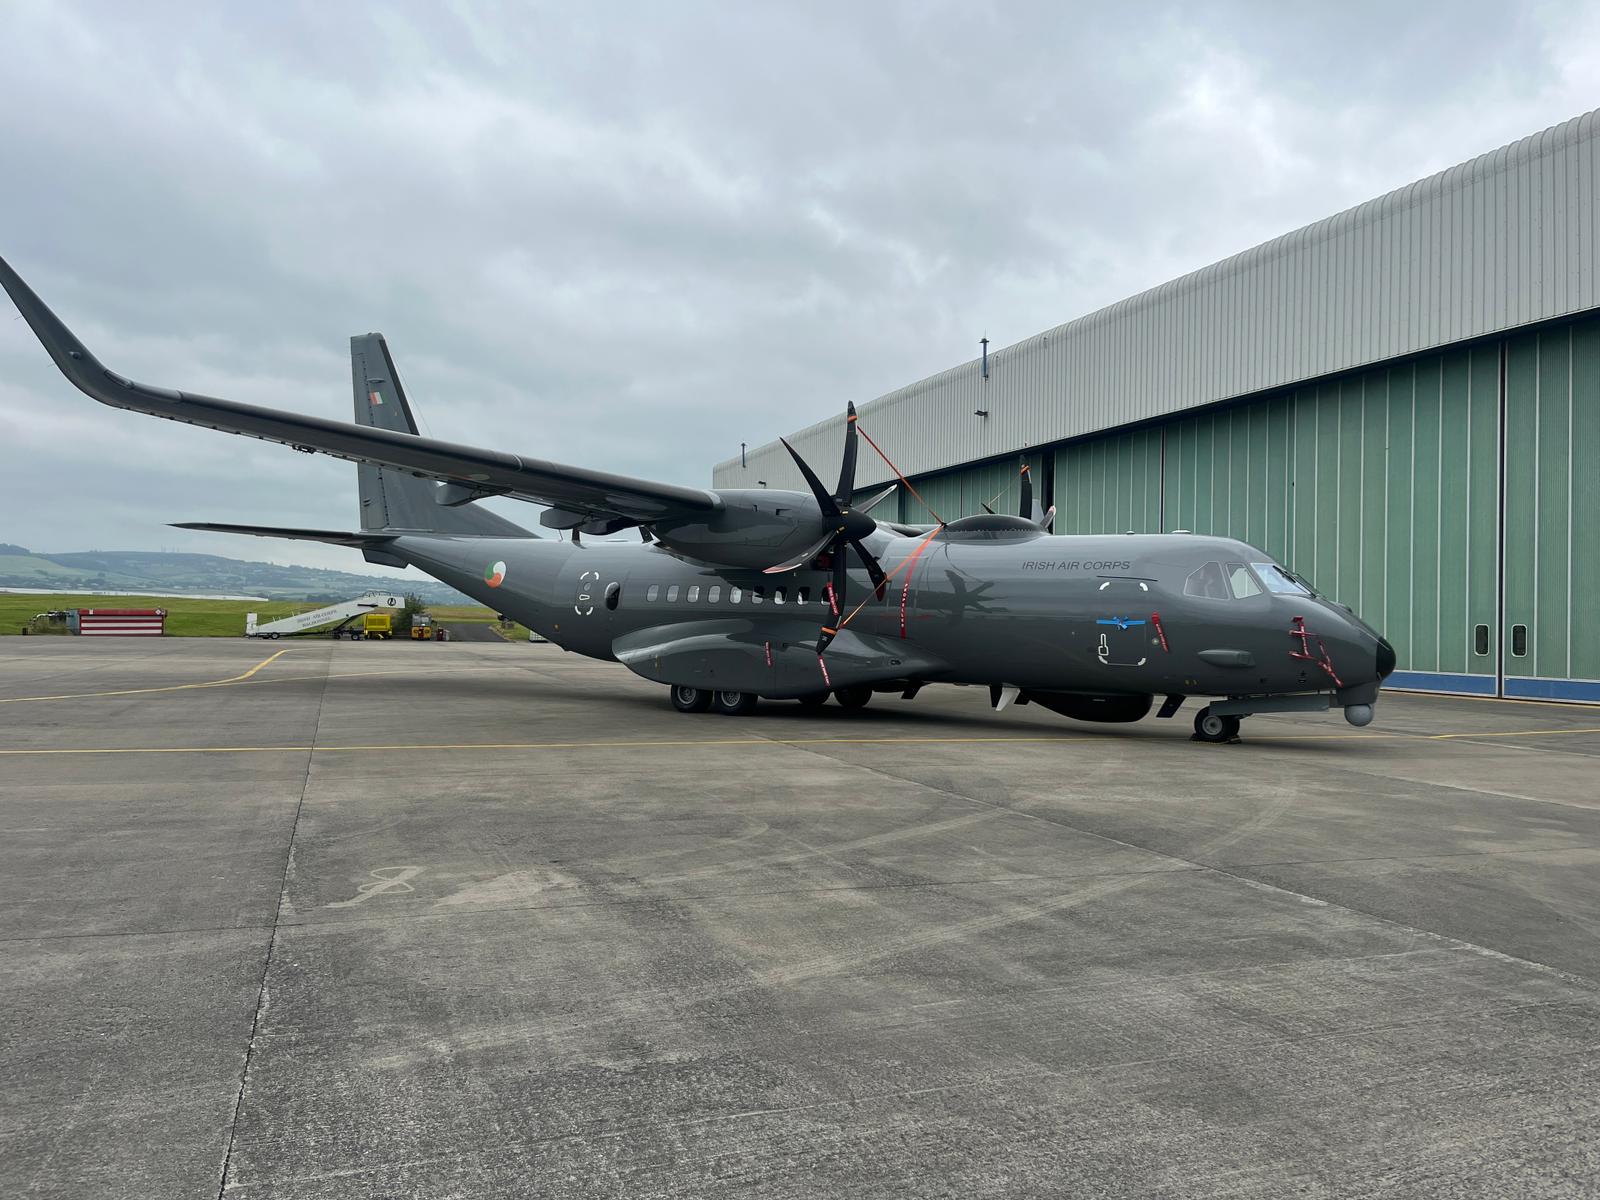 the arrival of the first of two Airbus C295 Maritime Patrol Aircraft.